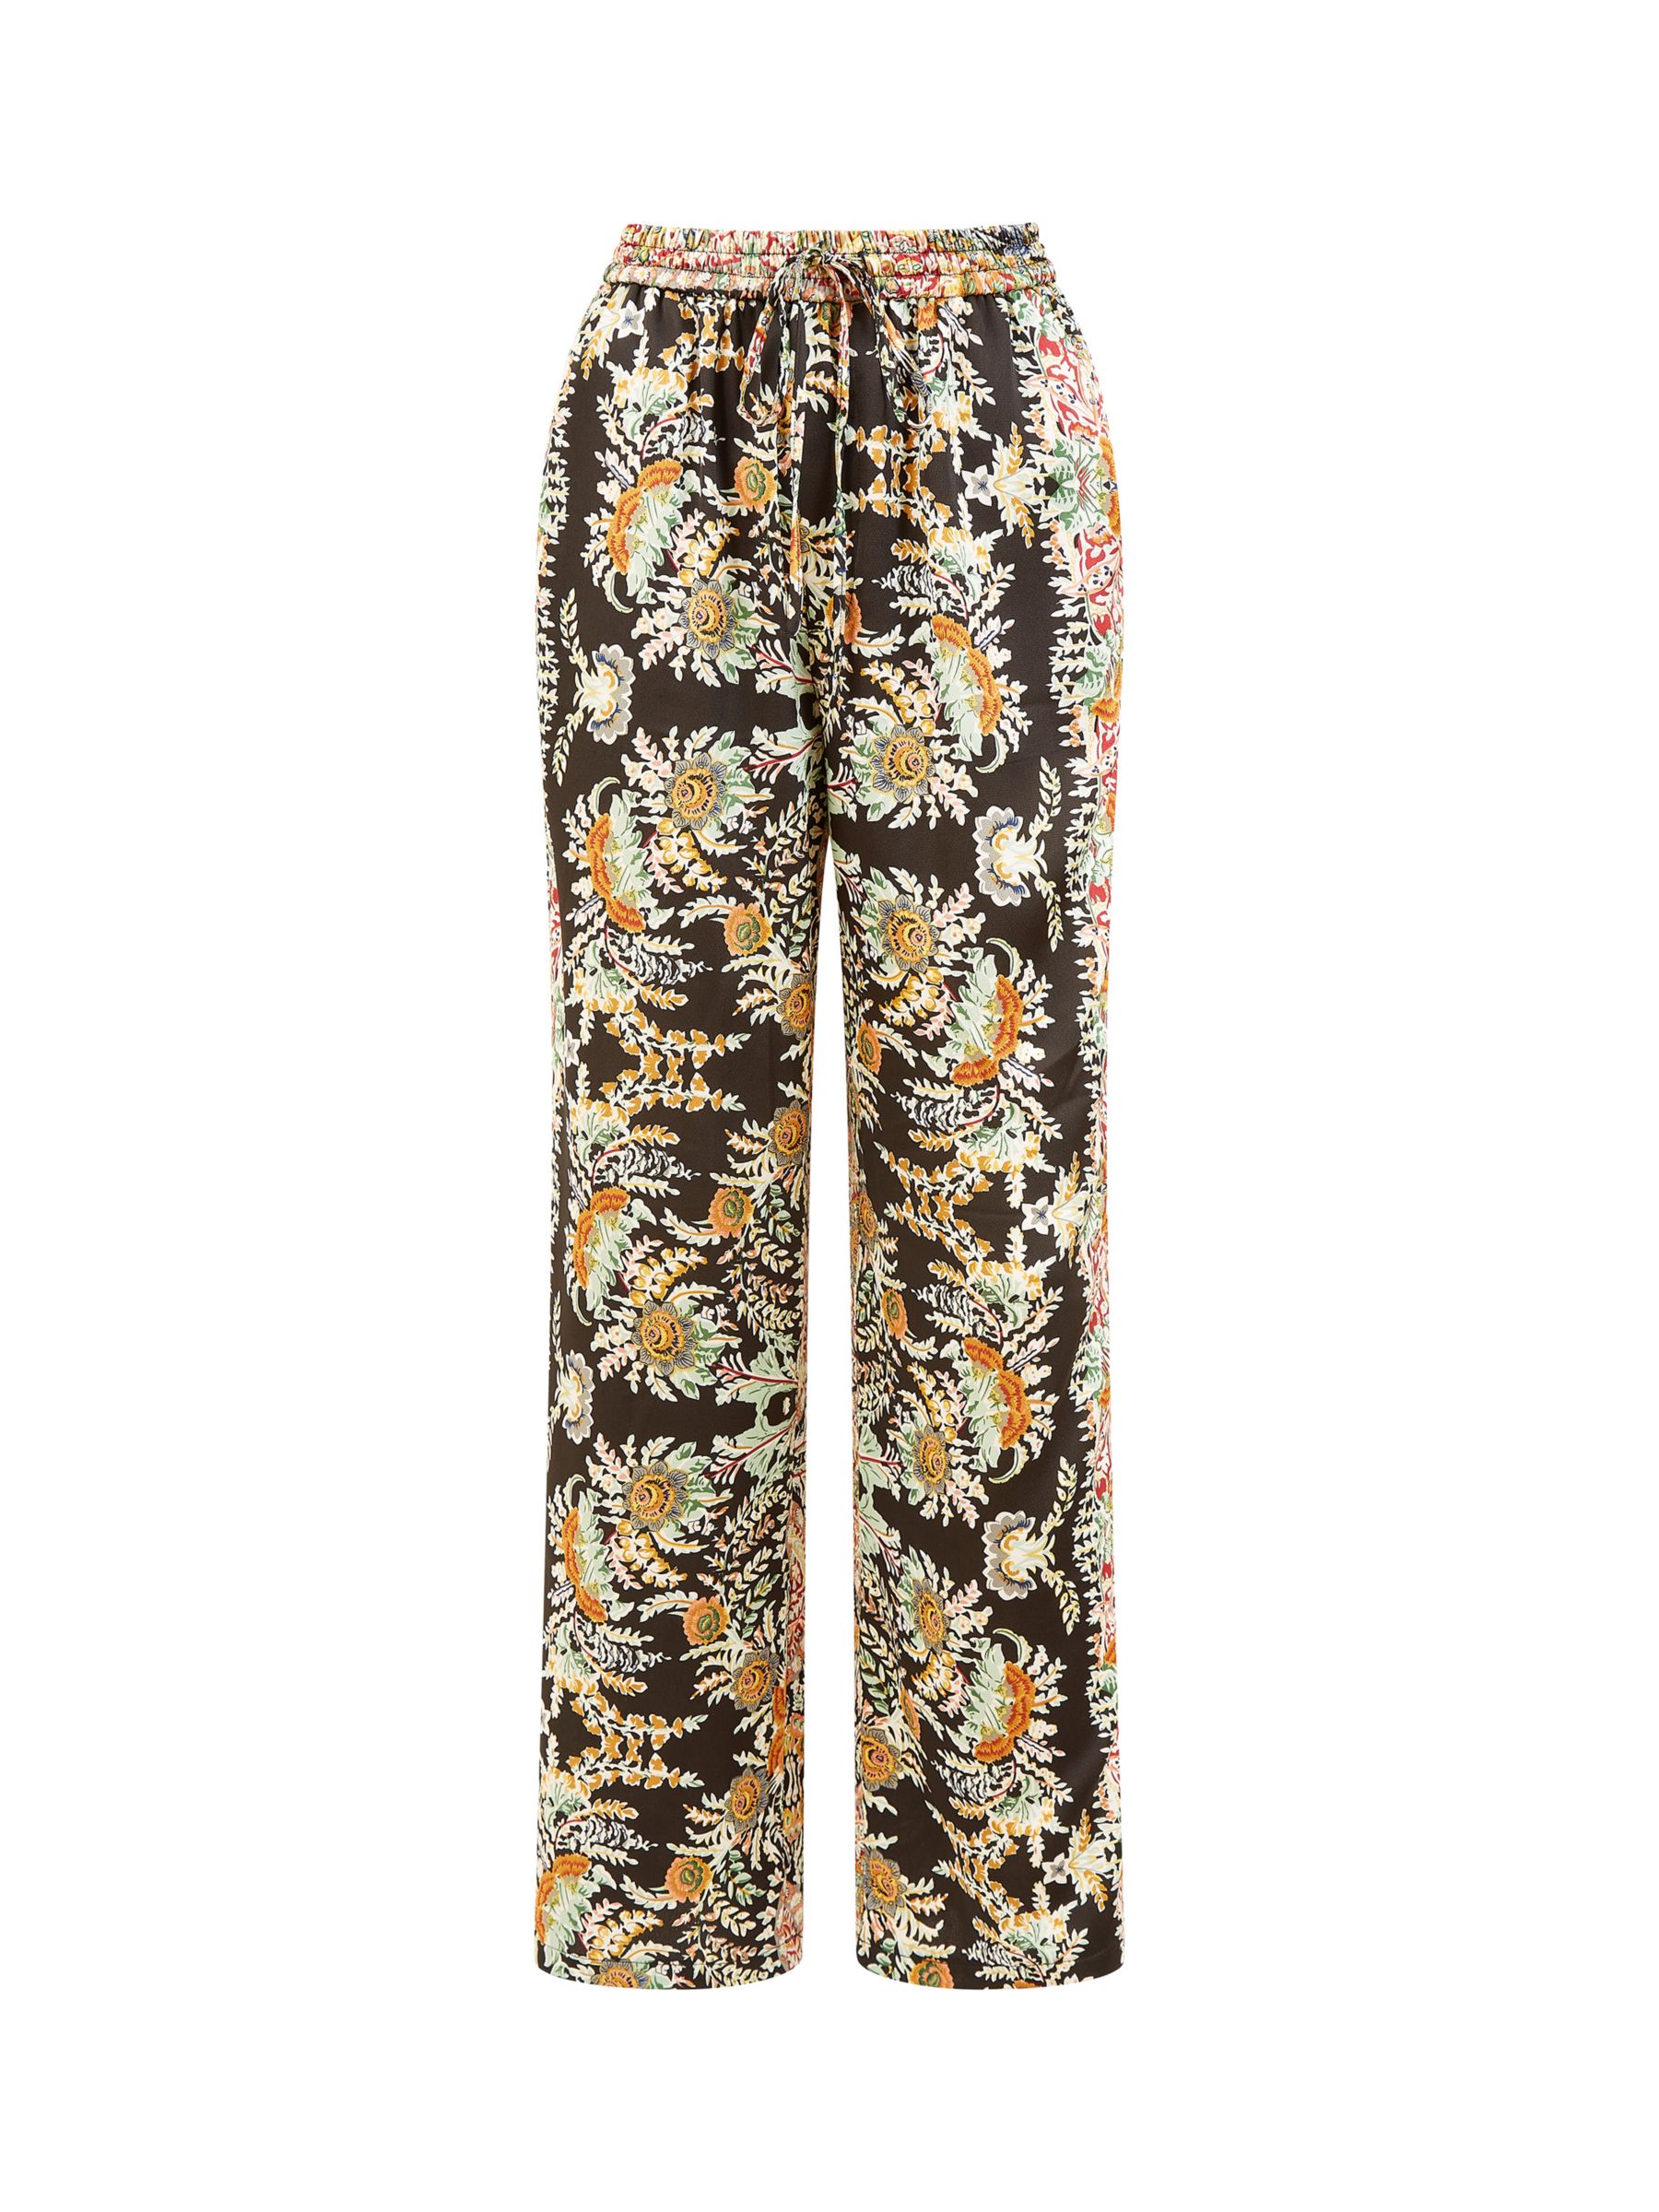 Yumi Paisley Relaxed Fit Trousers, Black/Multi, 8